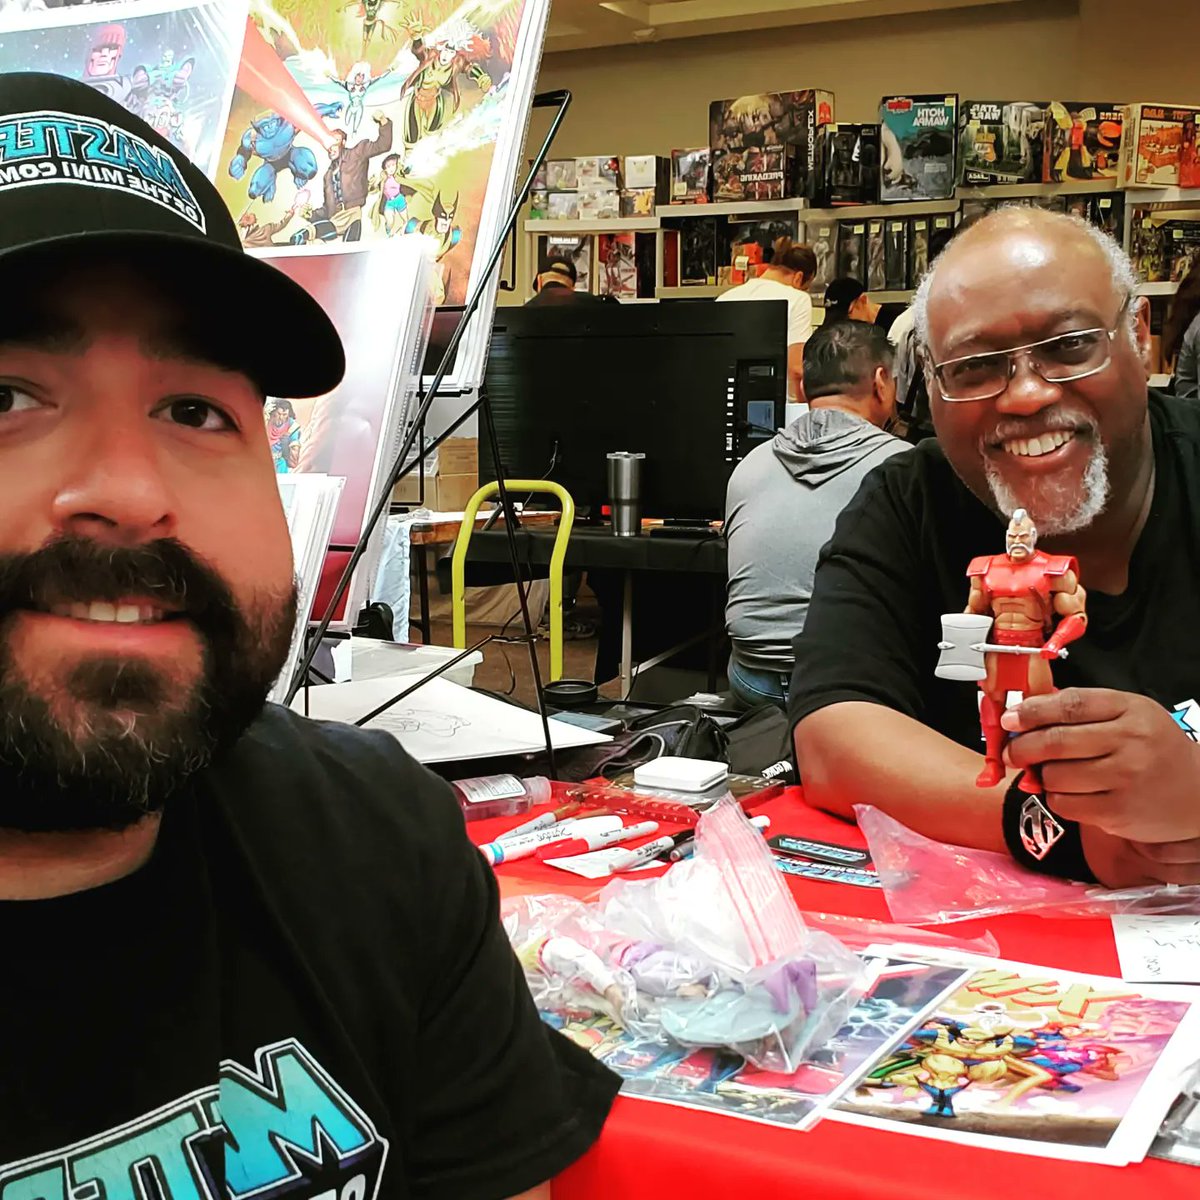 Got to hang out with Larry Houston today, a vintage MOTU minicomics artist! He was a great guy and has lots of history with tons of properties we love!! I gave him a Geldor, which was a character he created! #motu #TMNT #xmen #80scartoons #captainplanet #mastersoftheminicomics